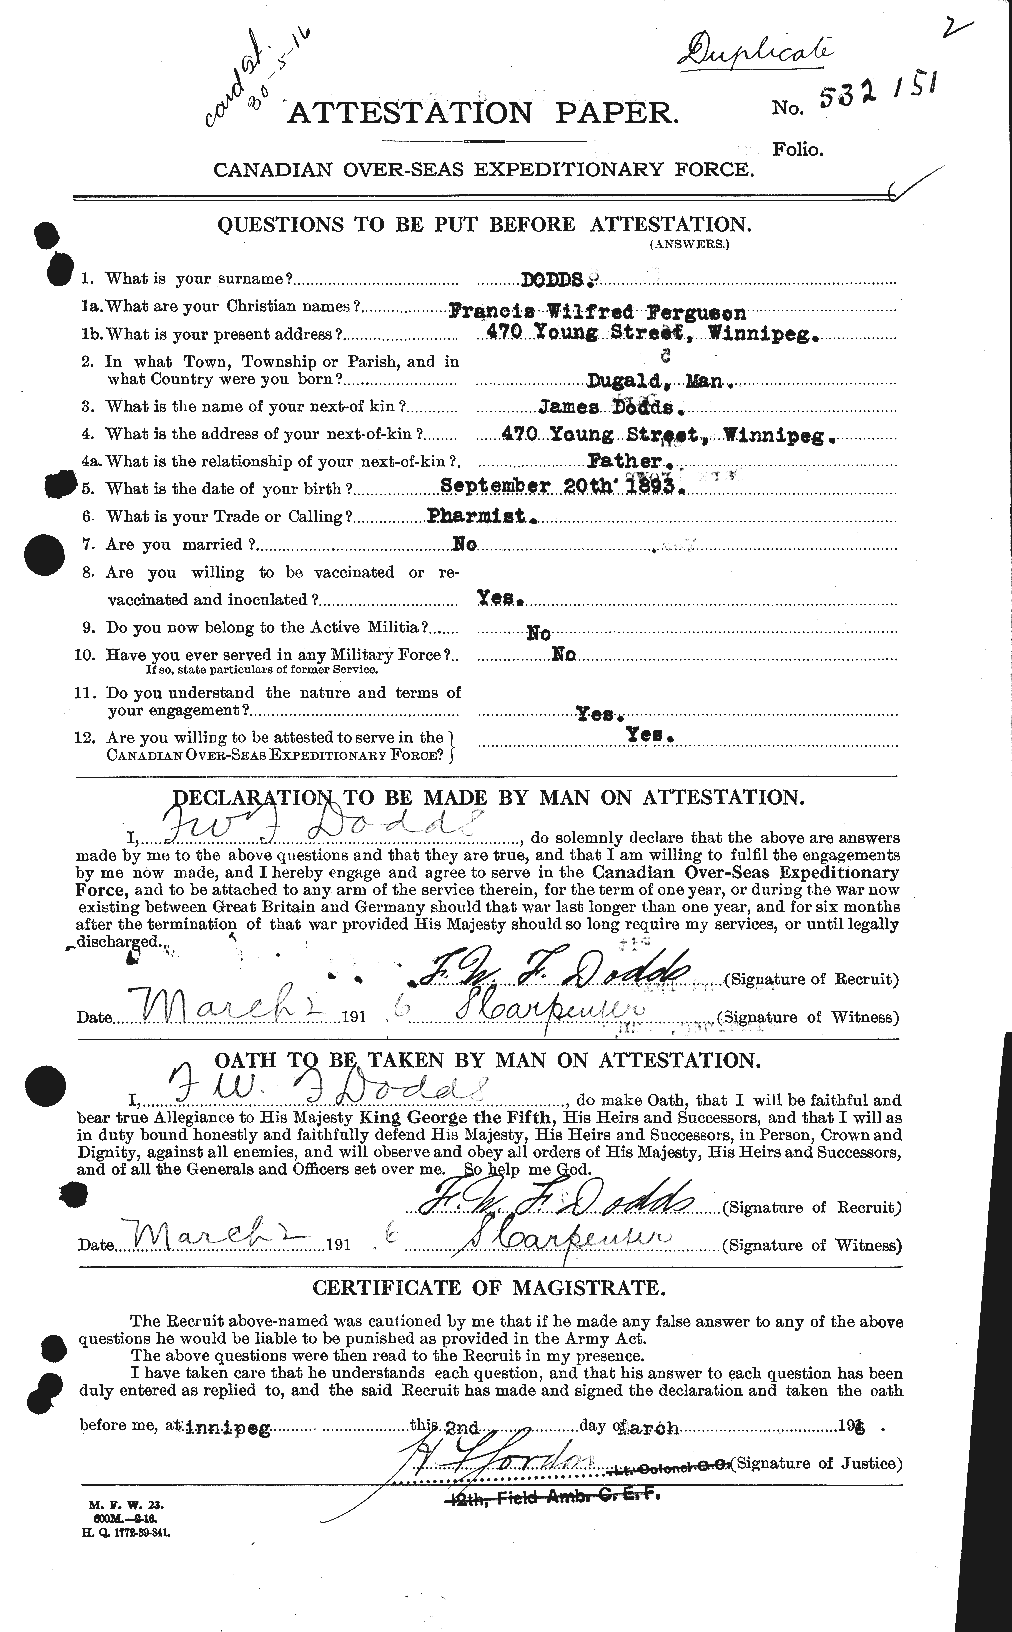 Personnel Records of the First World War - CEF 294371a